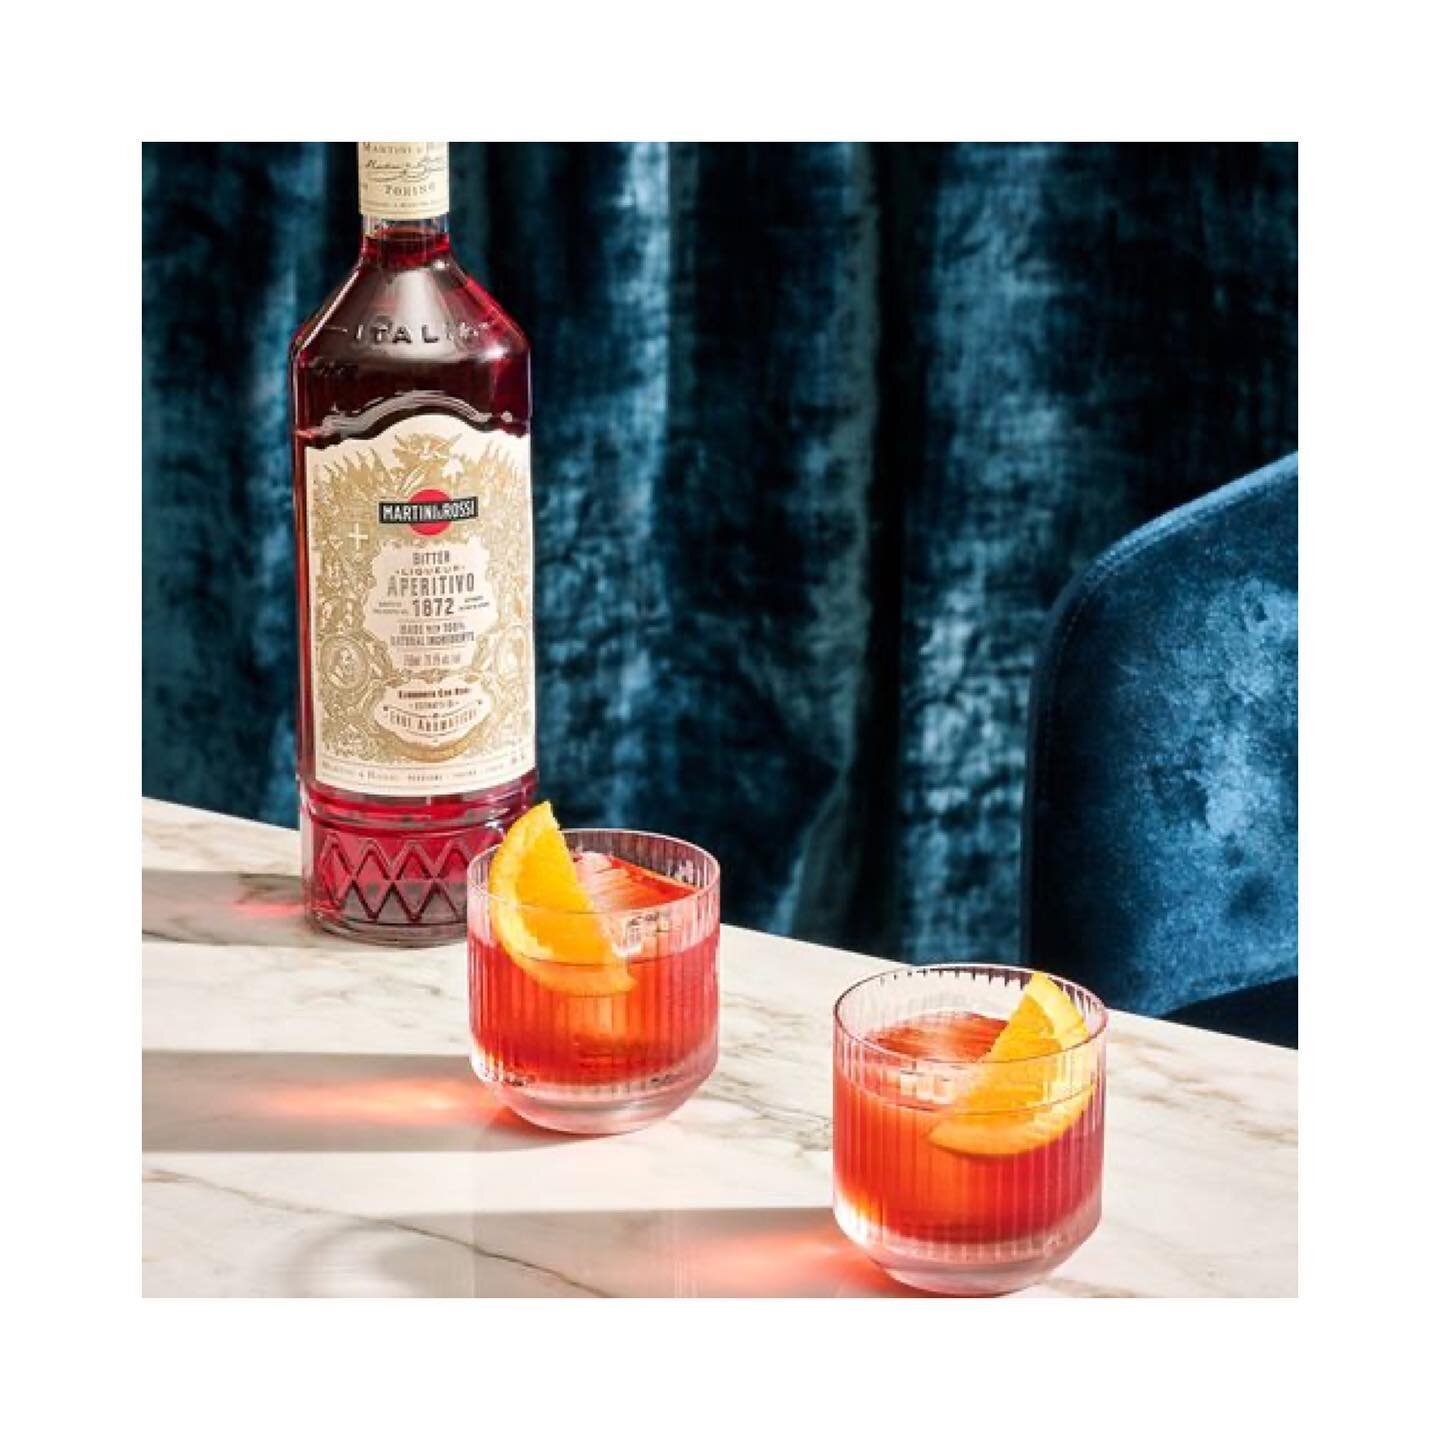 A #Negroni (regular), NOT #Sbagliato, sans prosecco in it. Still delicious. 🍊

Had a blast working with  @punch_drink and @martinirossius on this. Bigger vermouth fan today because of it.

Got to work with some of my favorites - @stephanielyeh on pr